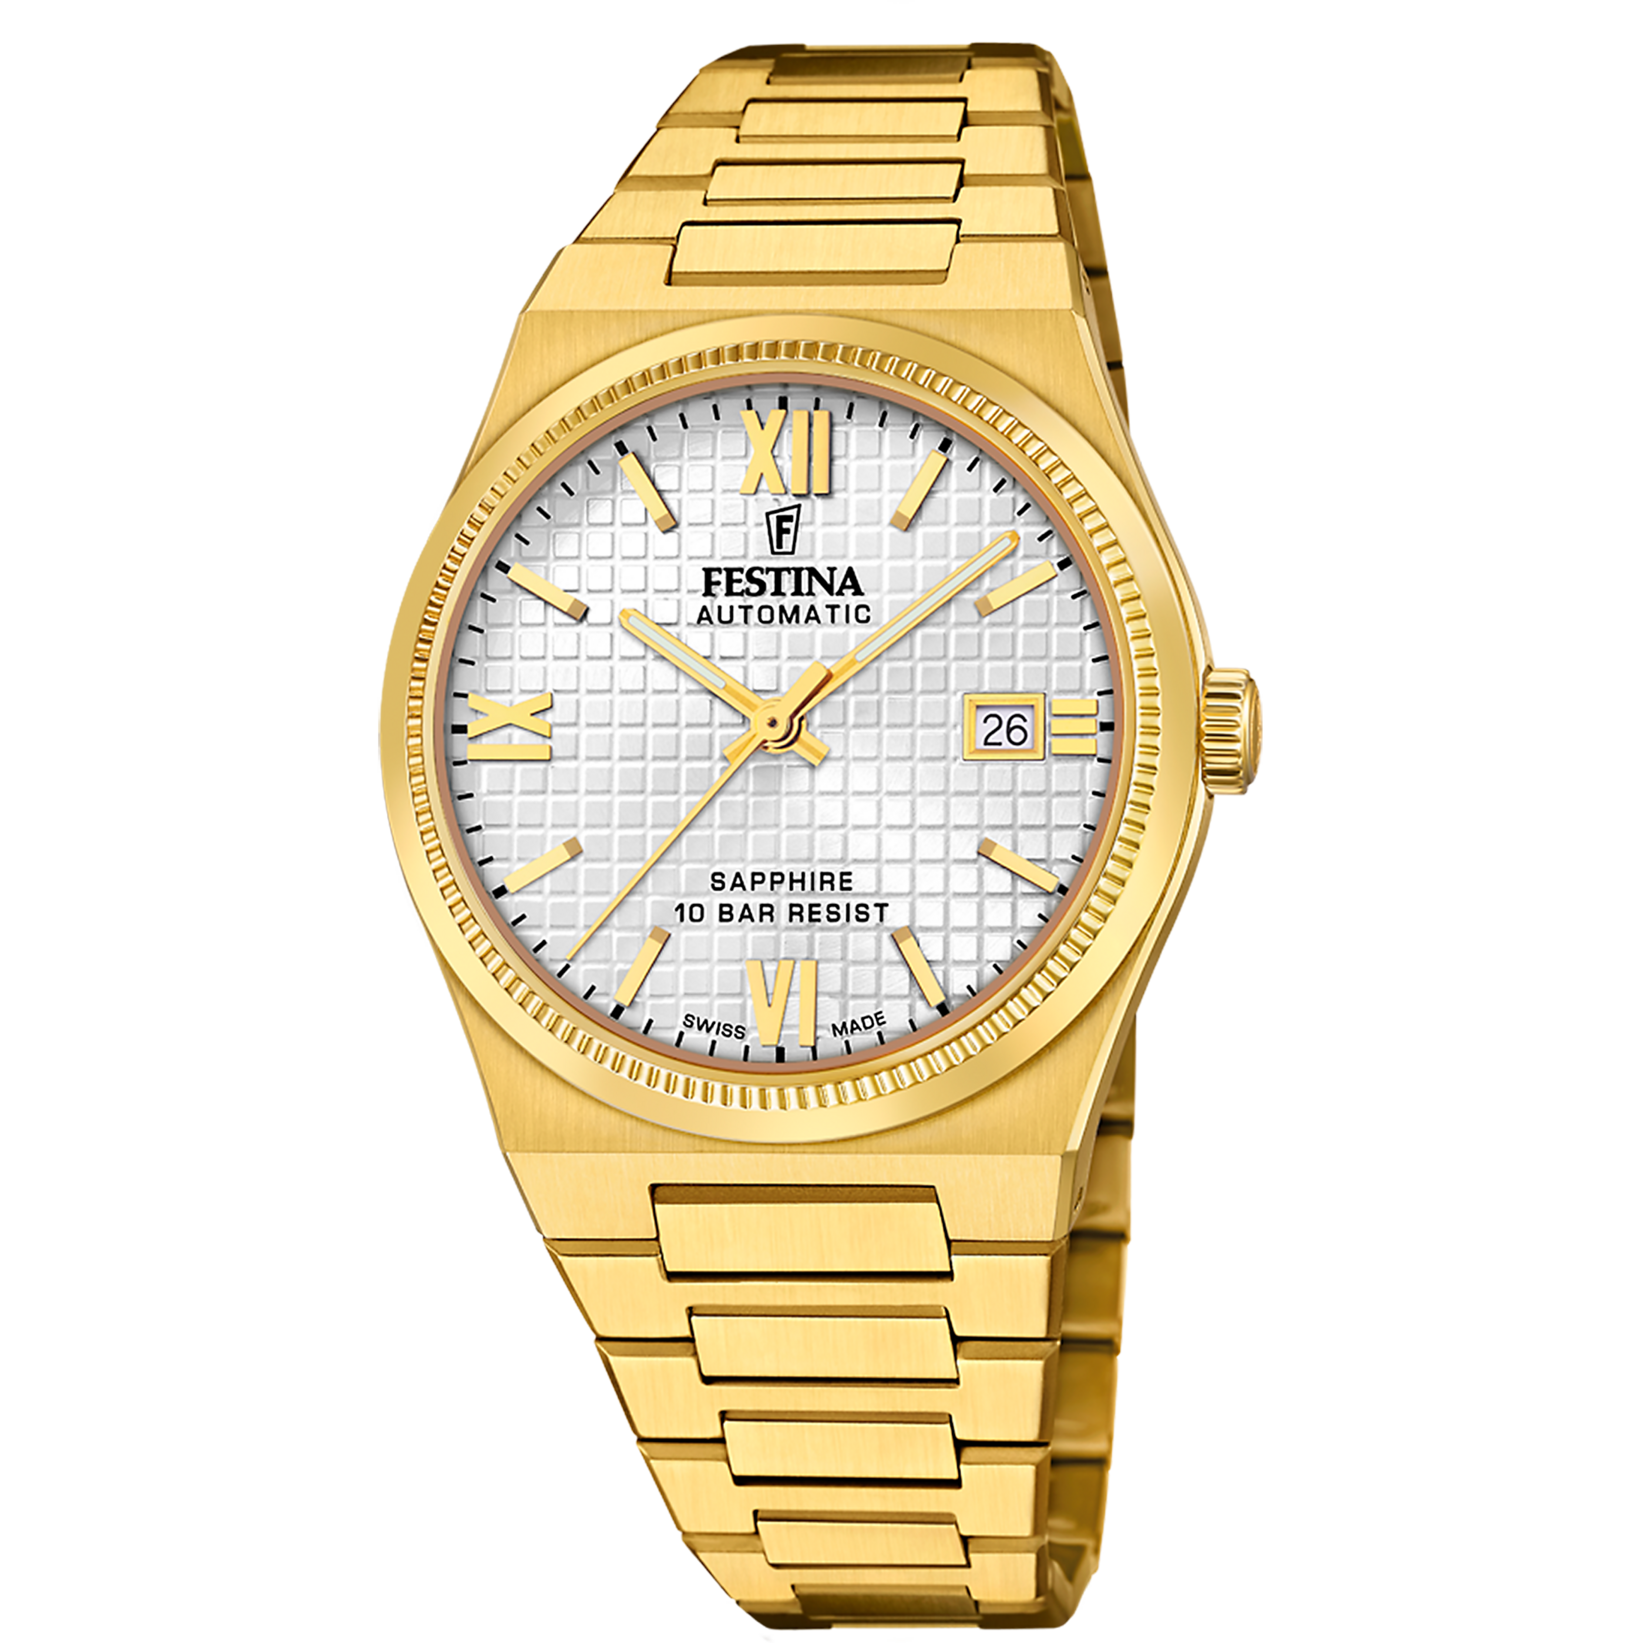 Festina Swiss Made F20032-1 - Analog - Strap Material Stainless Steel I Festina Watches USA